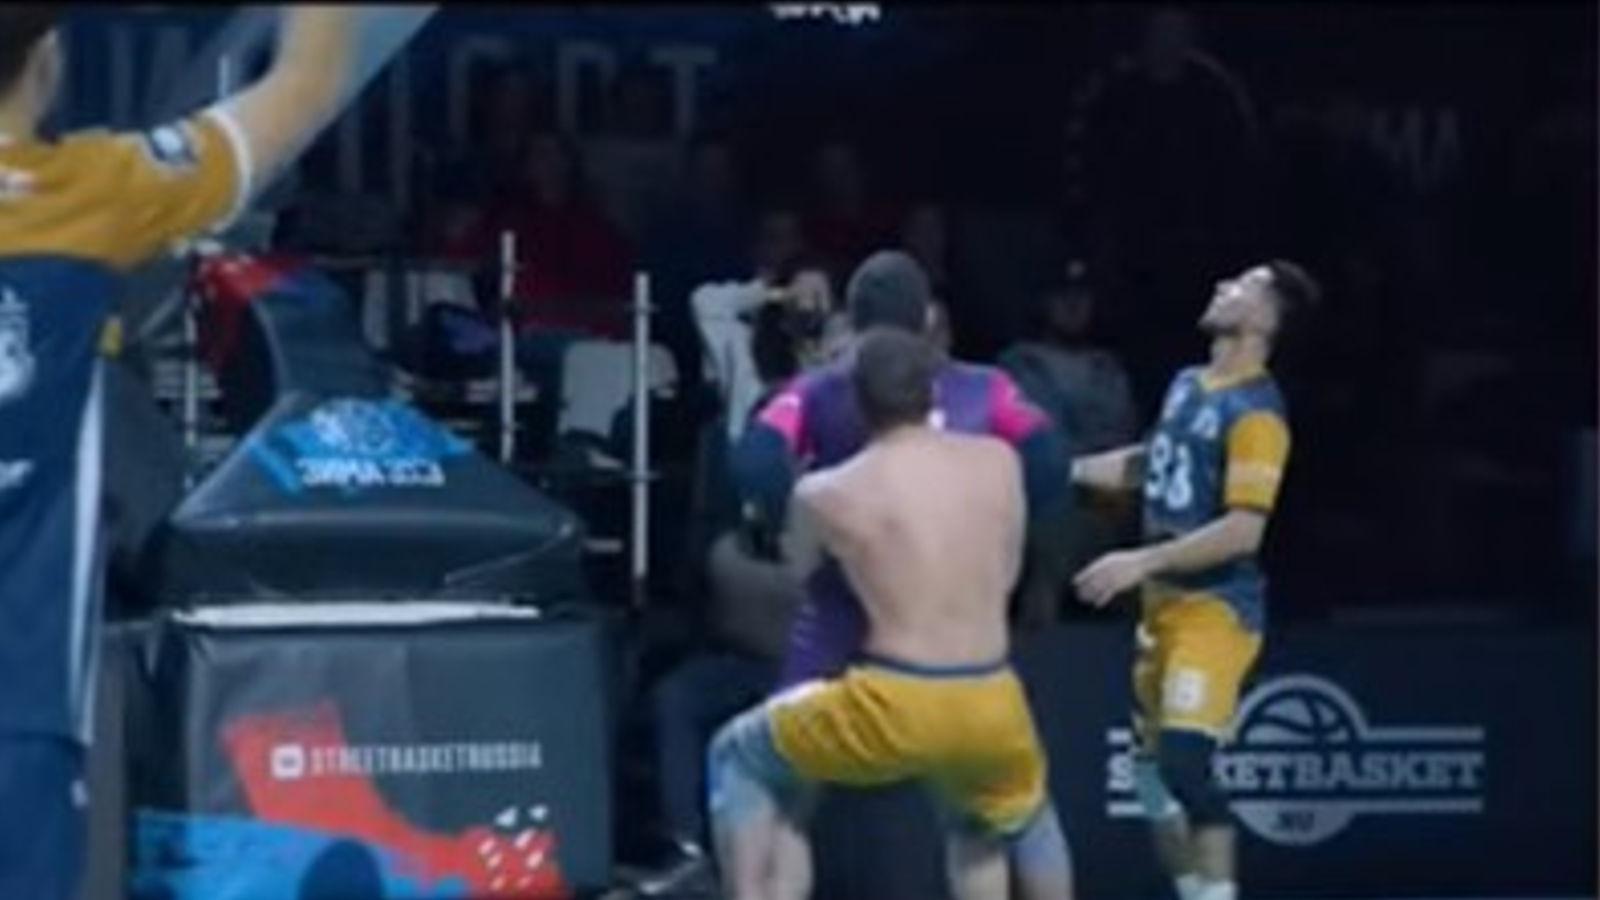 A Russian version of basketball allows players to German Suplex their opponents